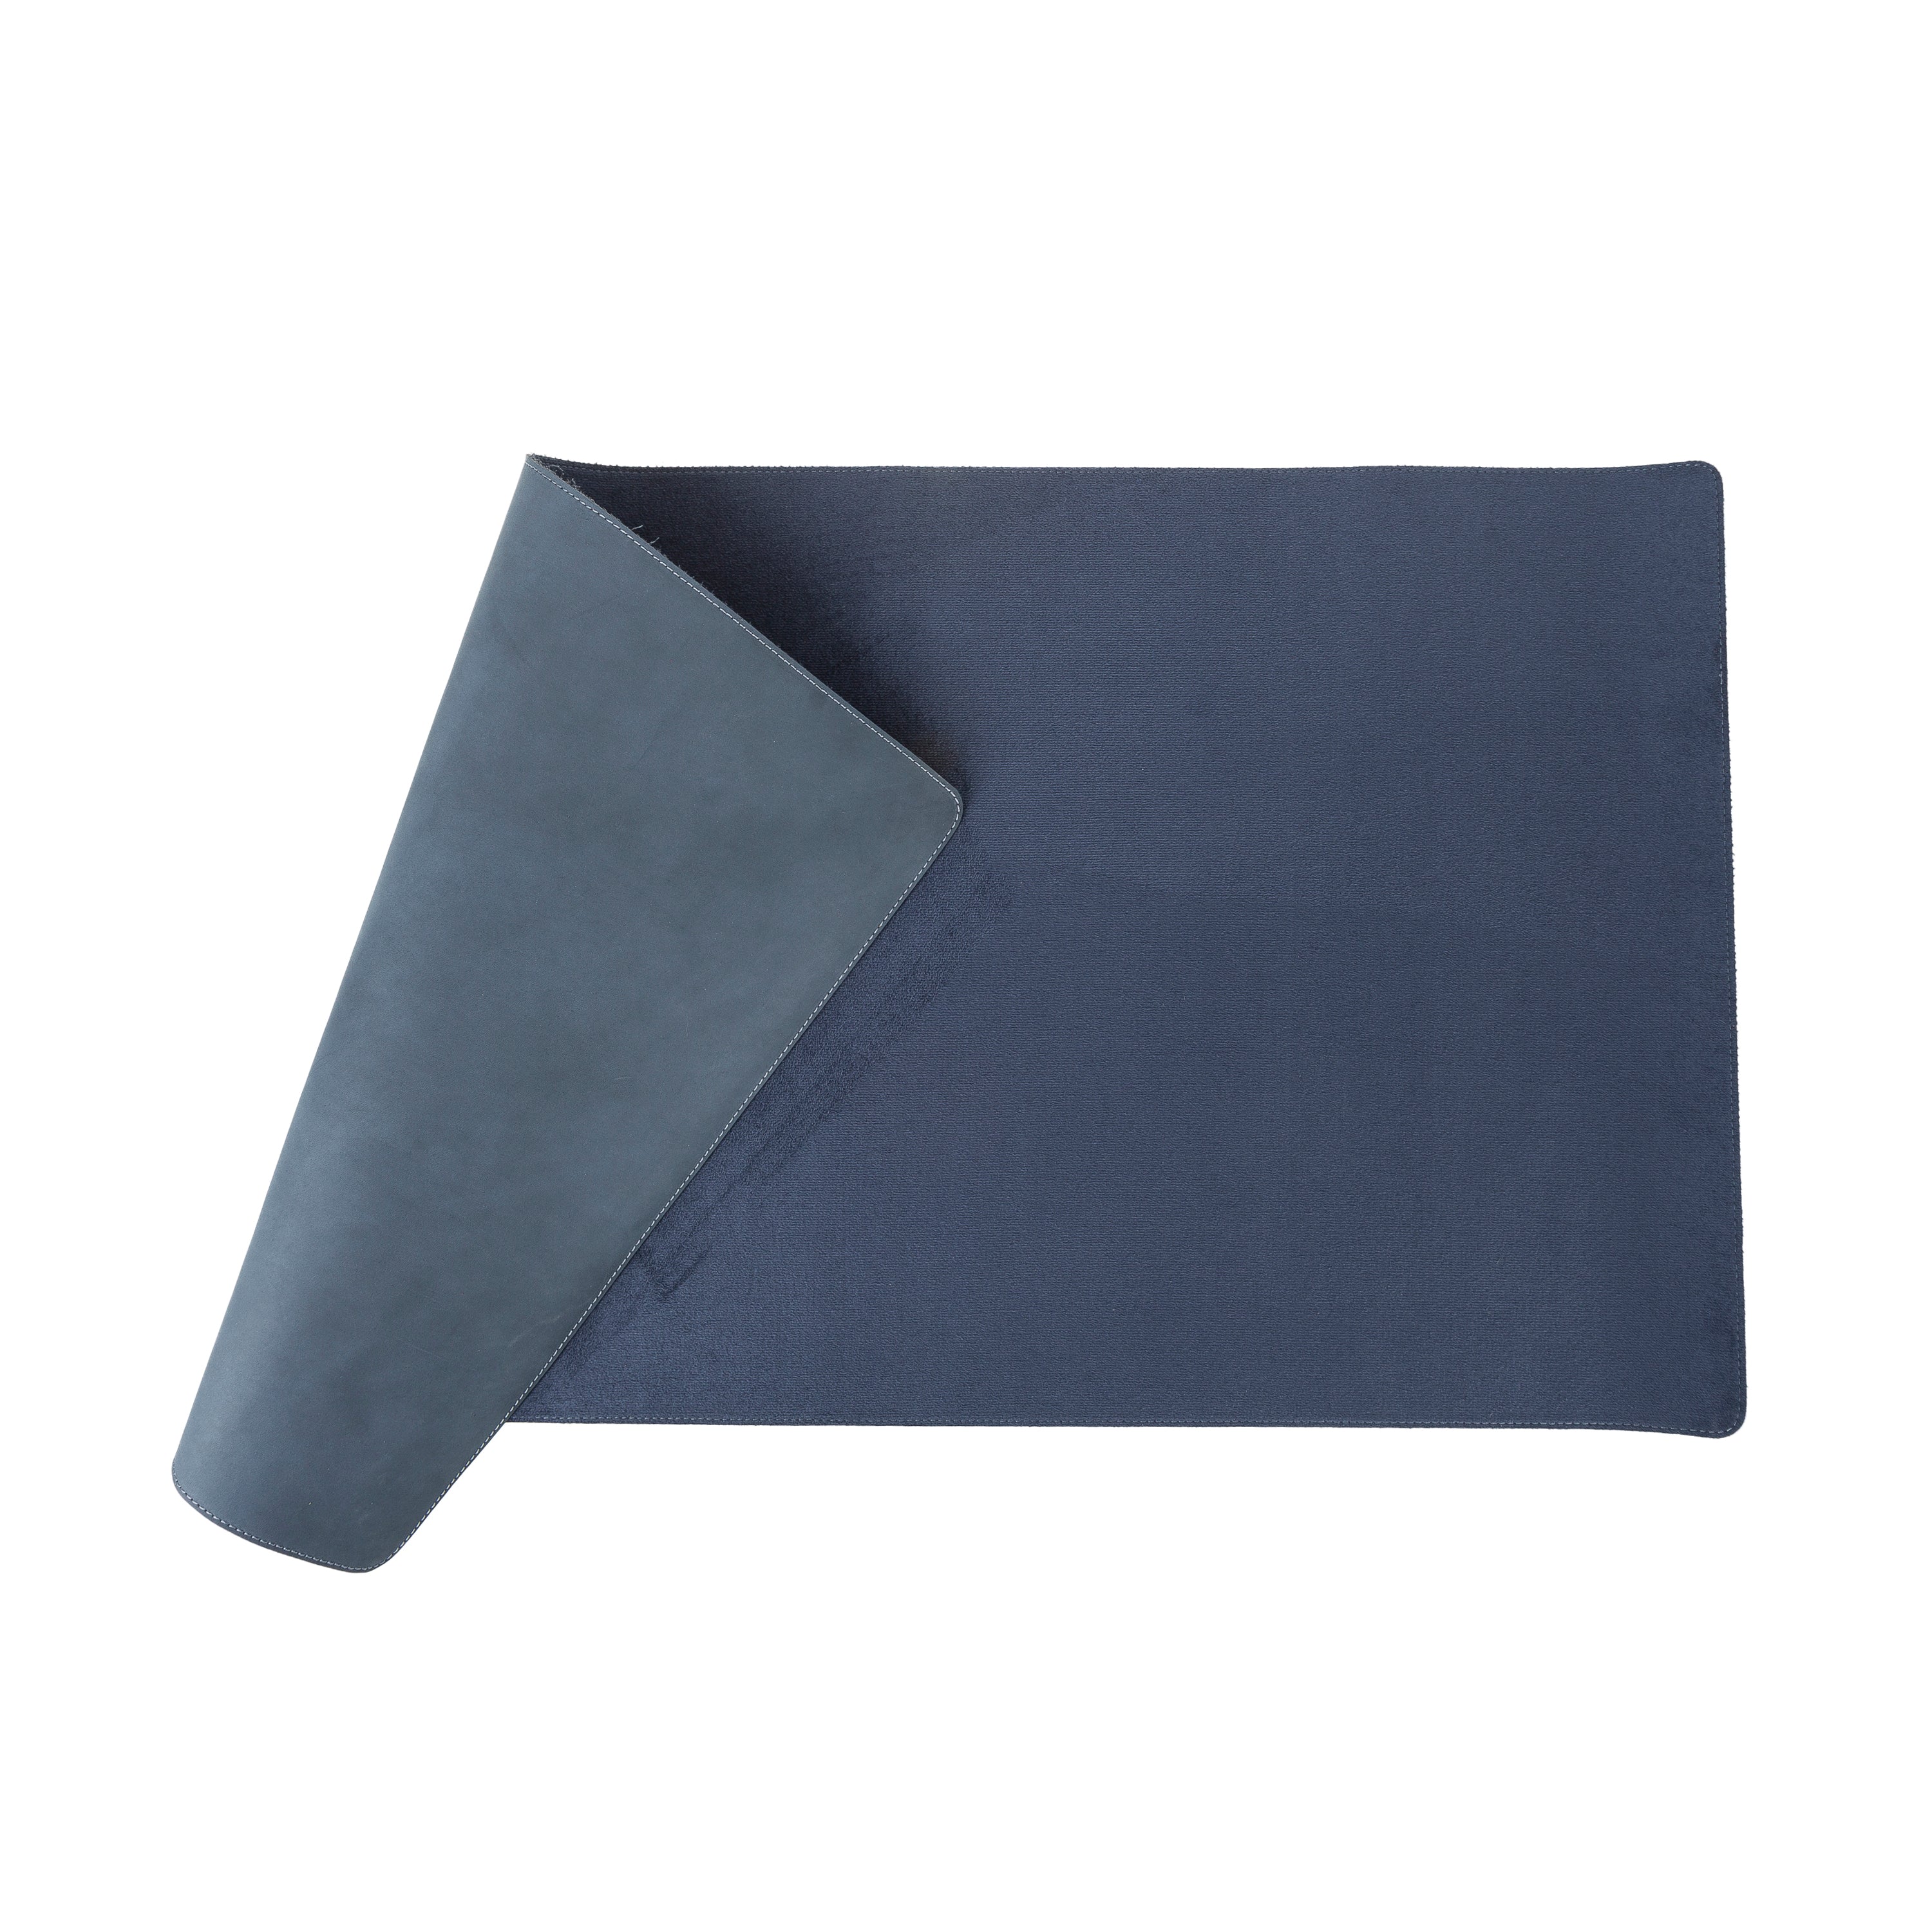 LupinnyLeather Genuine Blue Leather Deskmat, Computer Pad, Office Desk Pad 7